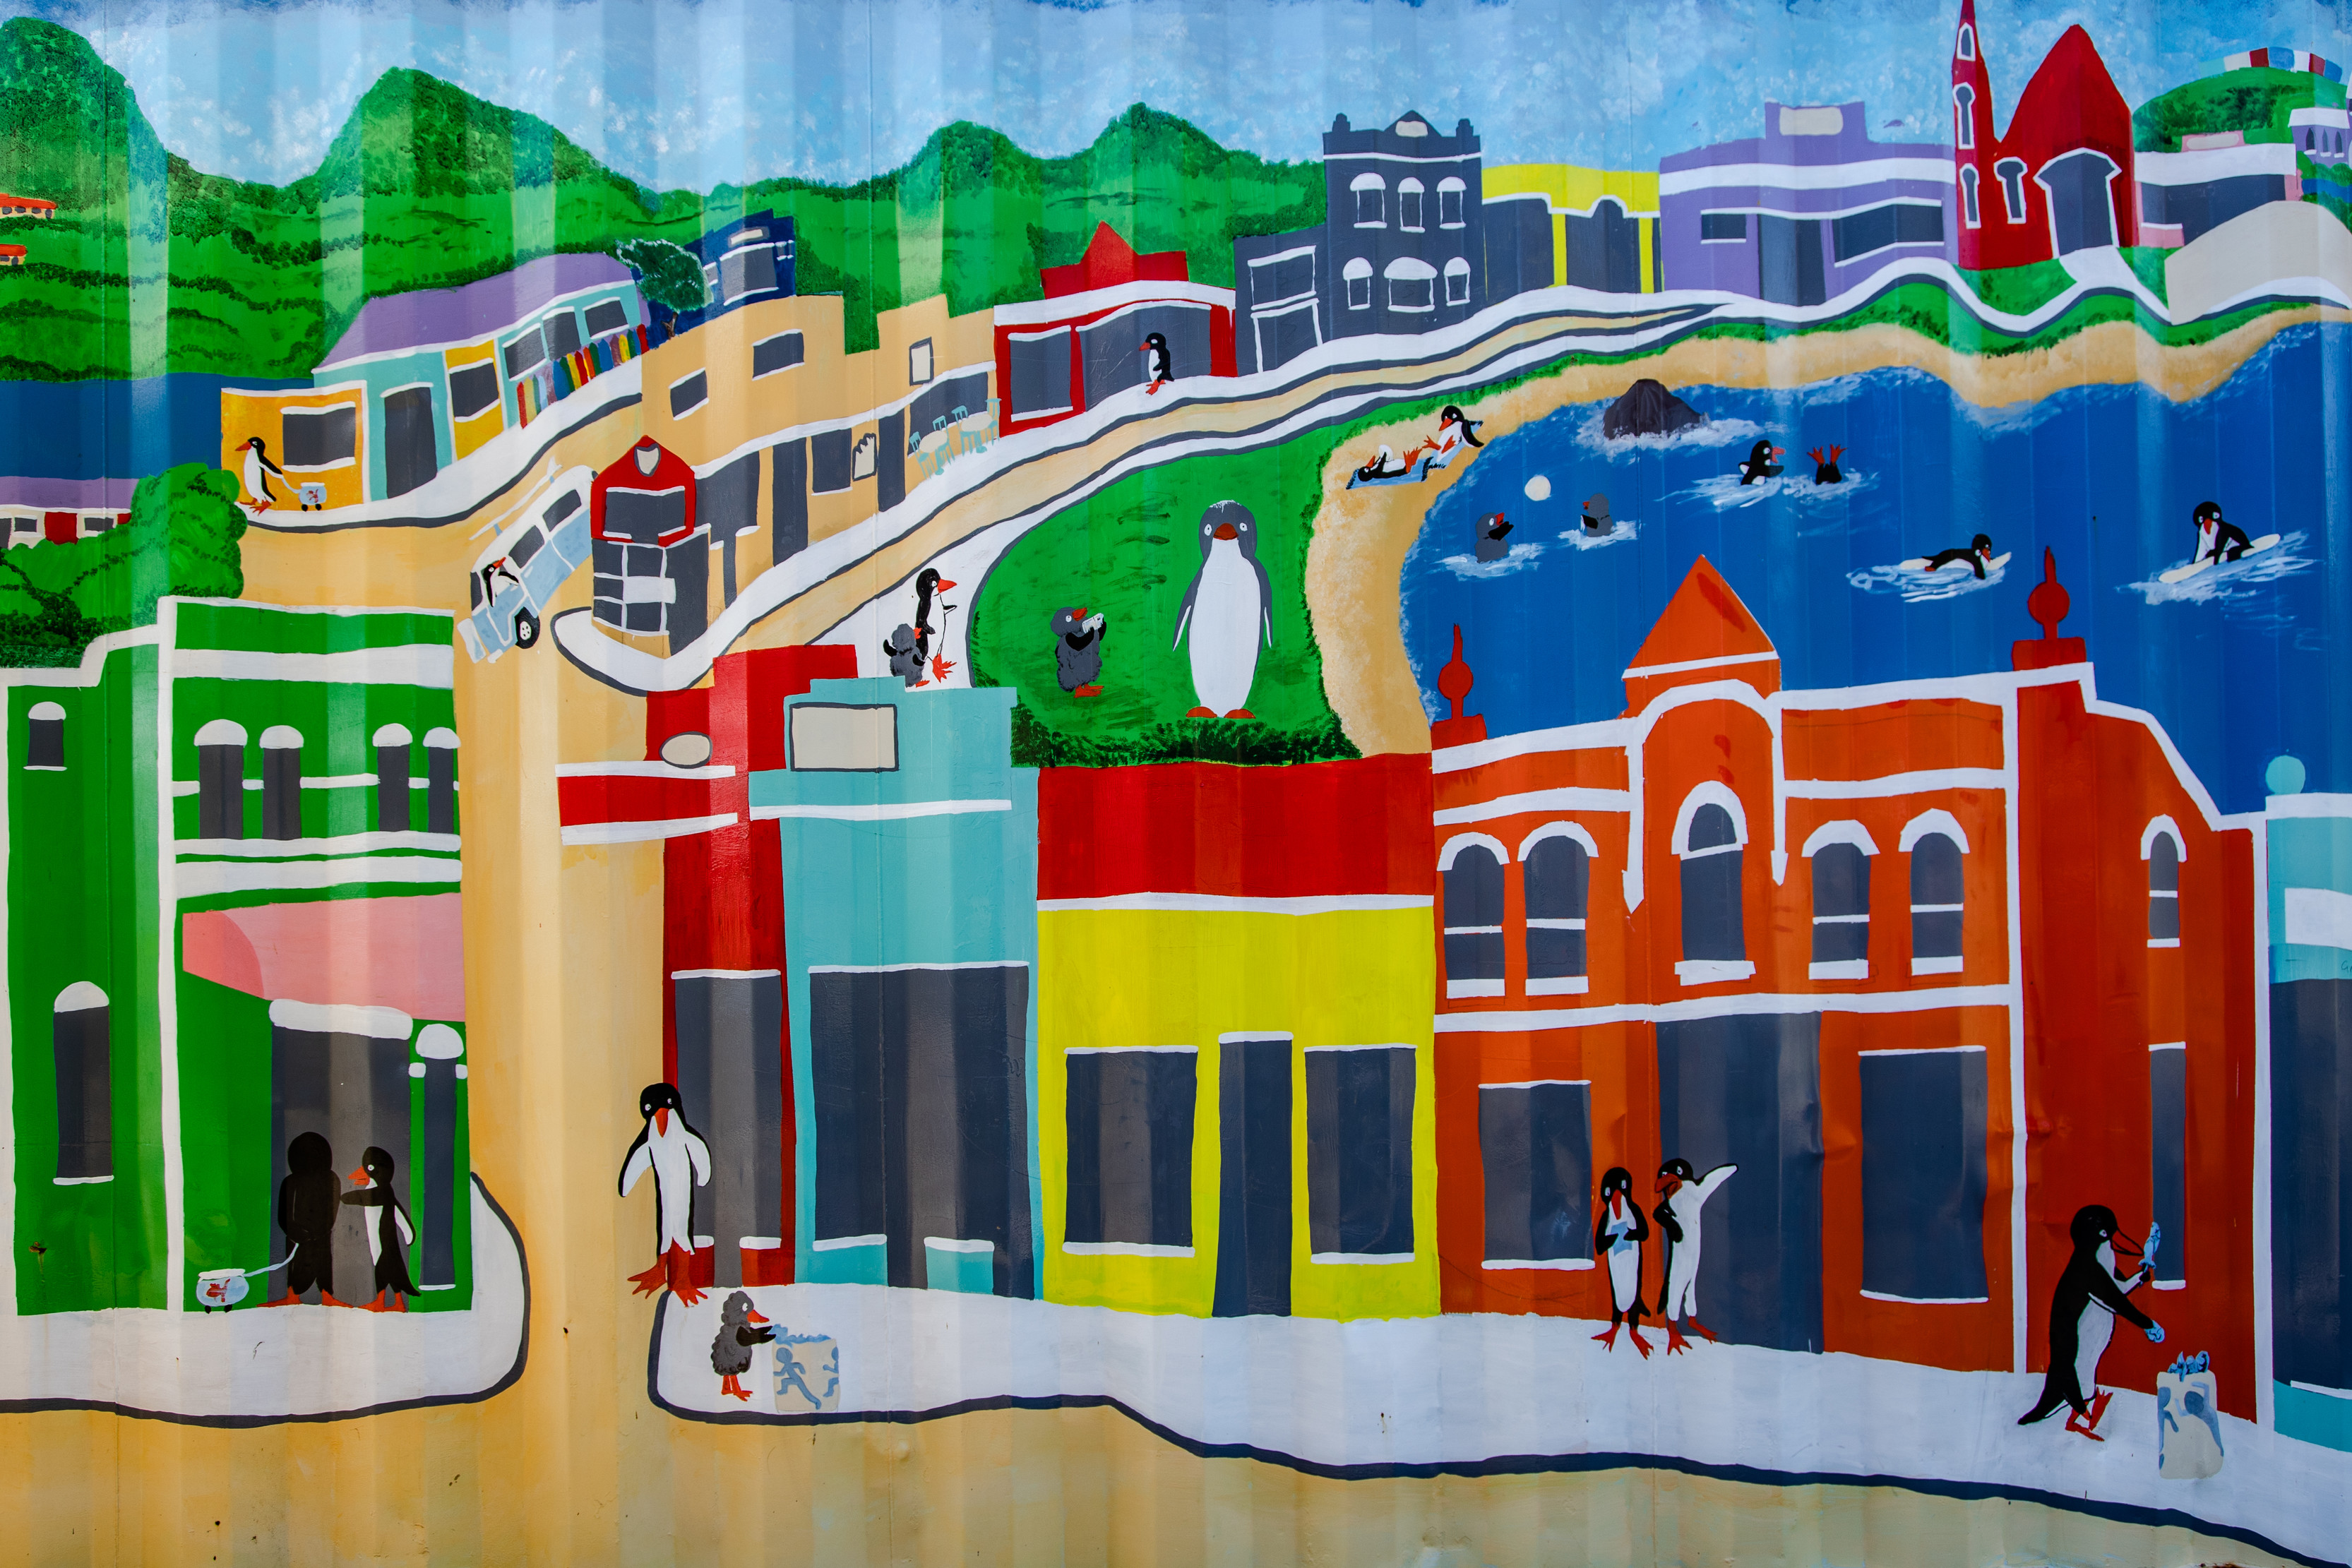 A cute mural of the Penguin foreshore, depicting the people as penguins. Filled with vibrant colours and a playful vibe.